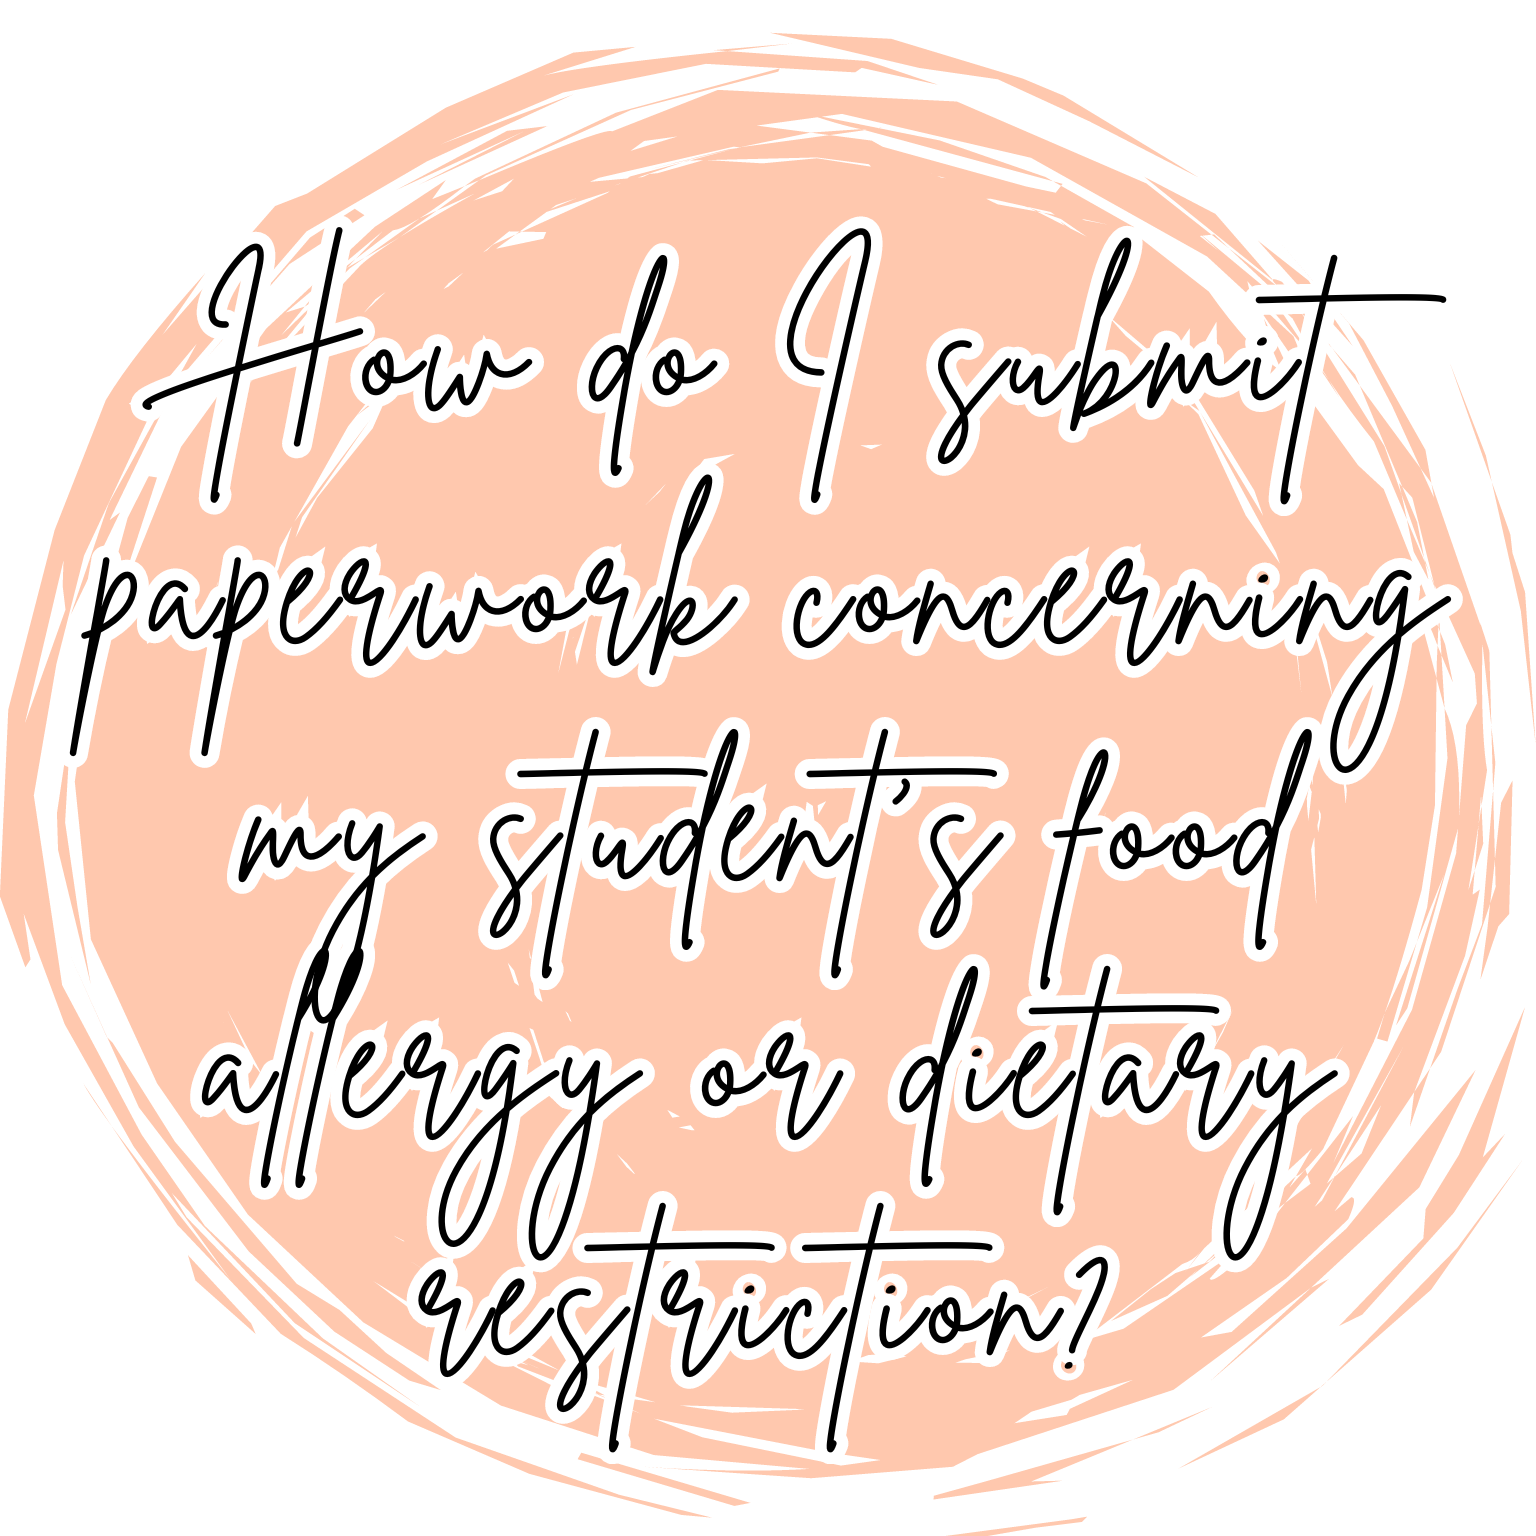 How do I submit paperwork concerning my student’s food allergy or dietary restriction?